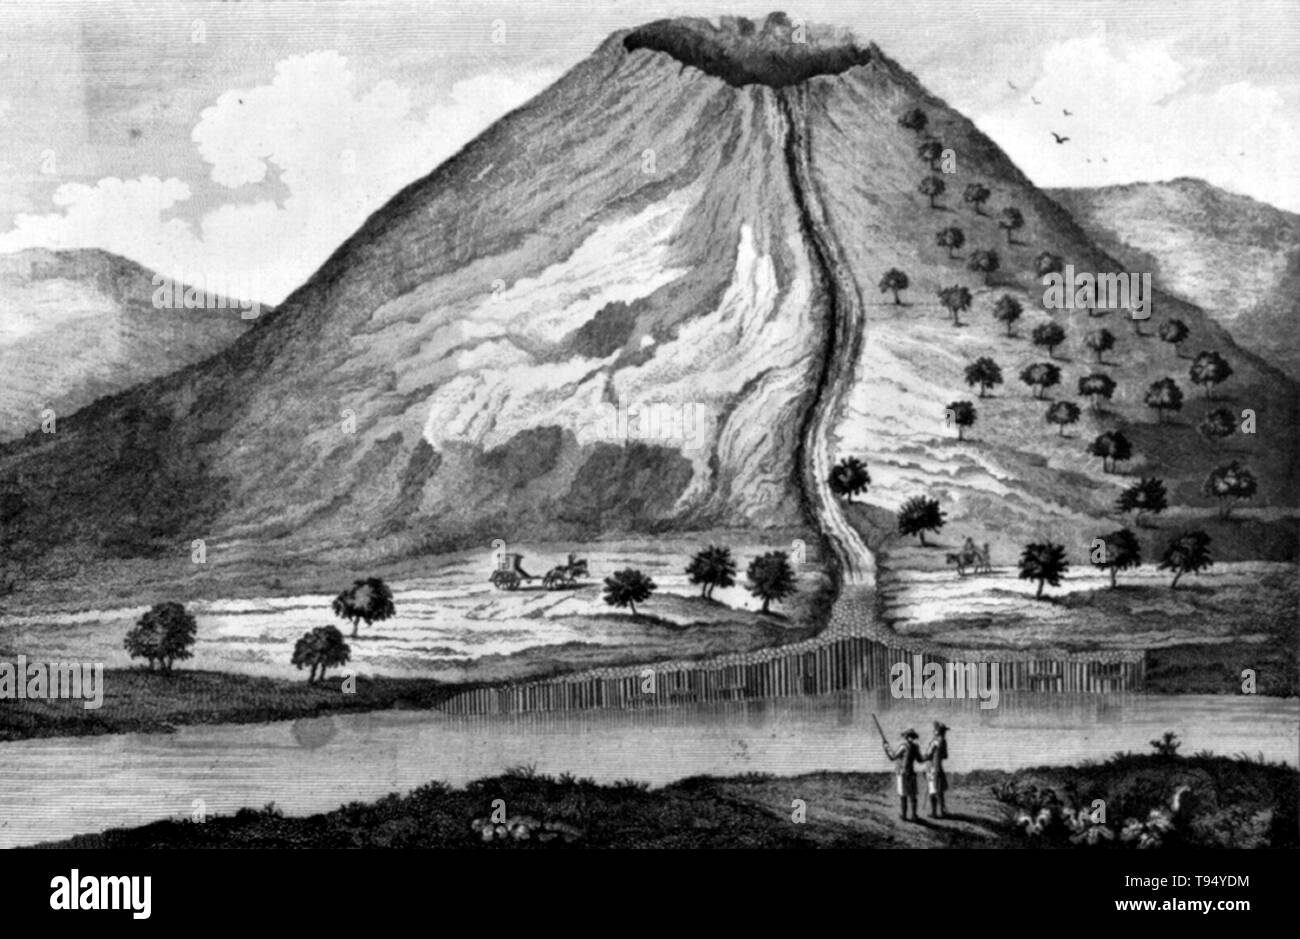 Engraving by Claude Fossard, de Veyrenc showing lava flowing down a volcano to form a street of prismatic basalt, 1778. Basalt is a very common igneous rock. Prismatic columns are formed when deep lava flows cool slowly, this causes shrinkage and the most popular form taken is hexagonal. The number of column sides does vary and some are almost square. Stock Photo